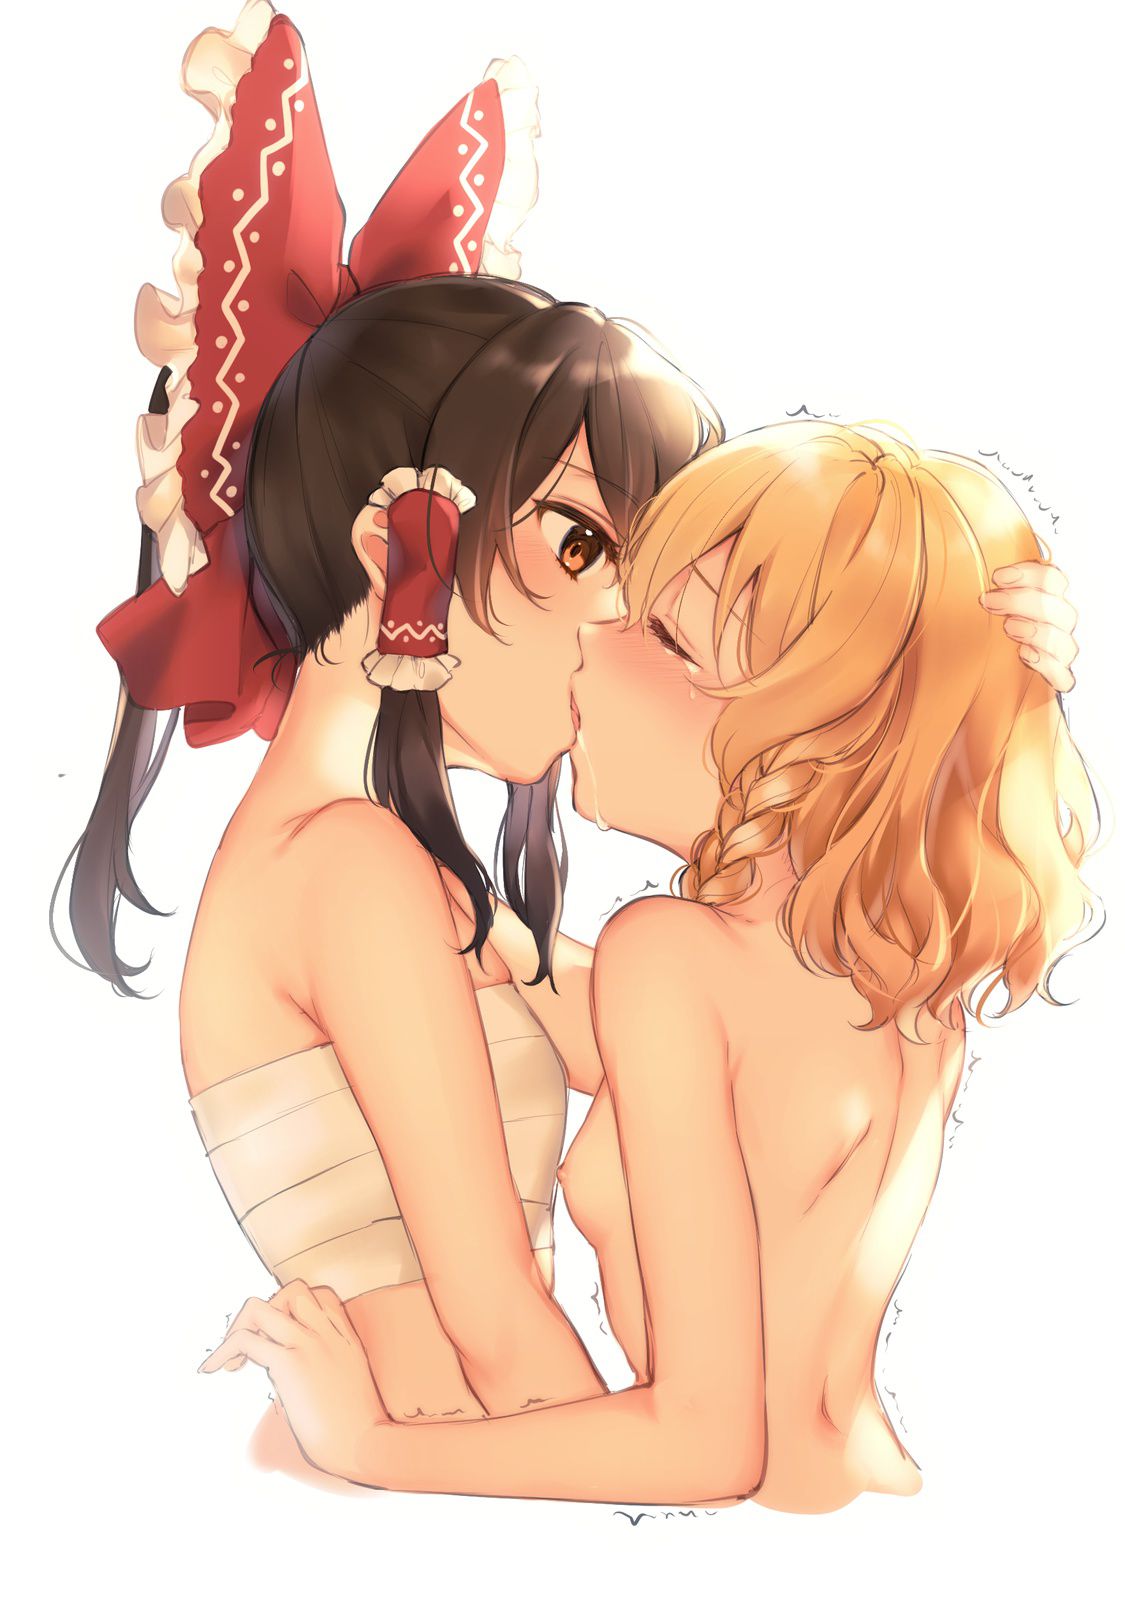 【Touhou Project】Drizzle Marisa's Erotic Image Part 14 28